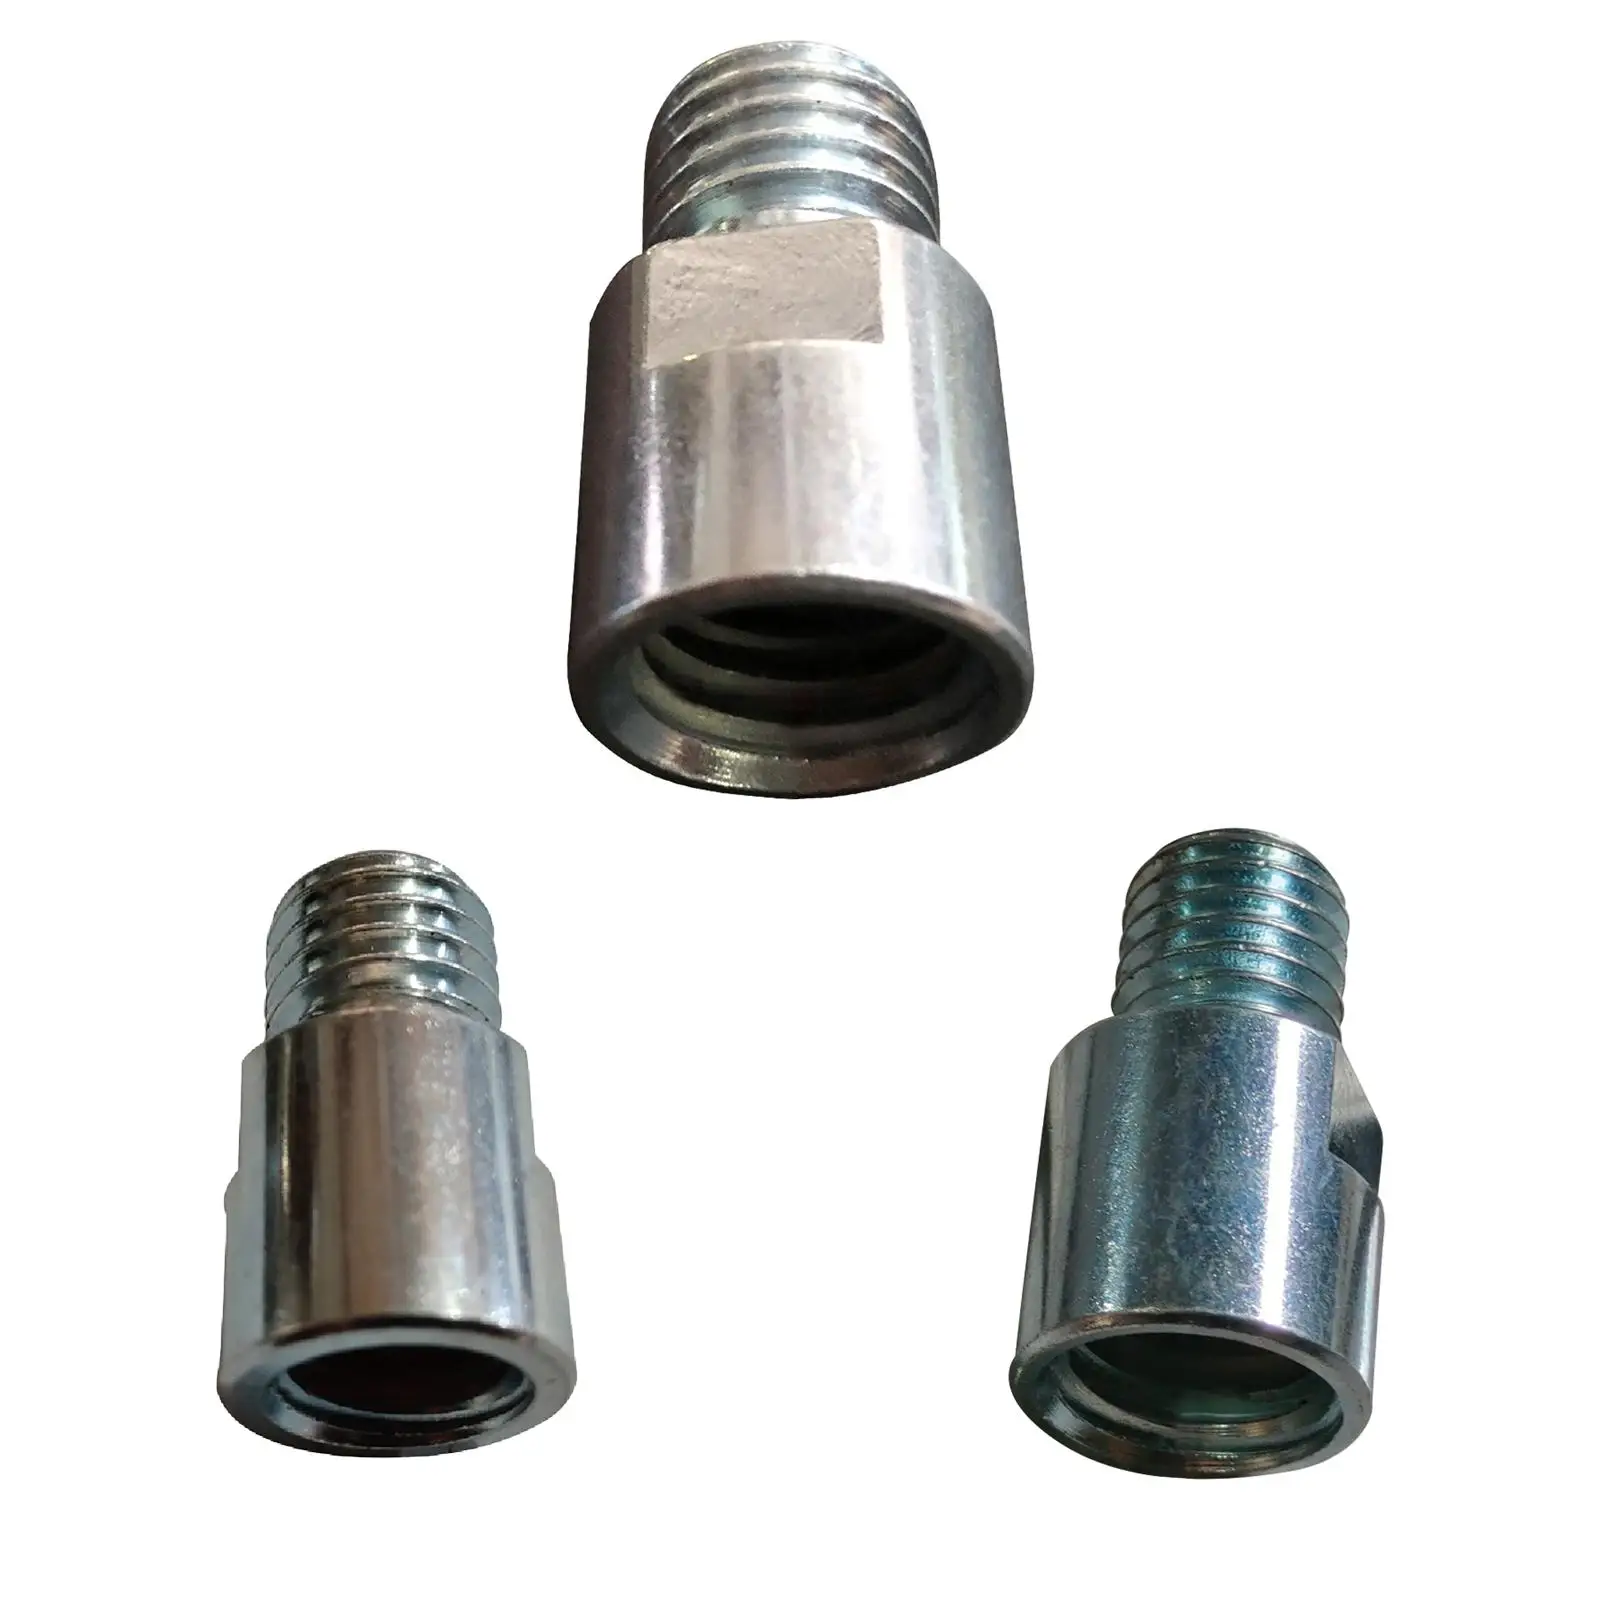 Angle Grinder Adapter Converter Polisher Interface Connector Quick Connect Angle Grinder Thread Adapter for Angle Grinder Tools